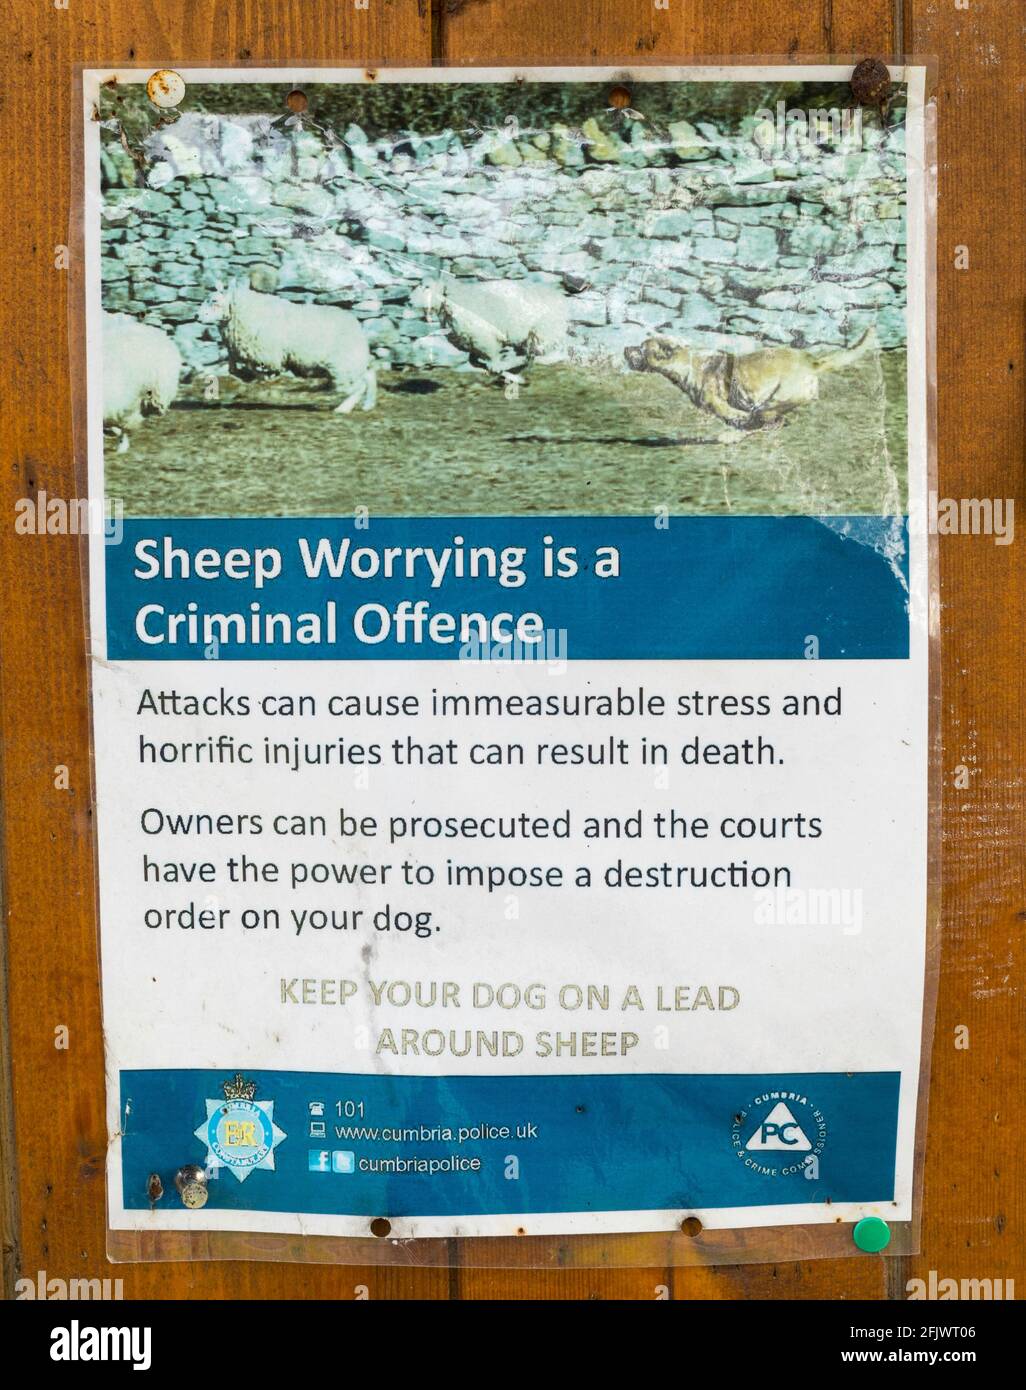 Cumbria police notice Sheep Worrying is a Criminal Offence in Sedburgh, Cumbria England UK Stock Photo